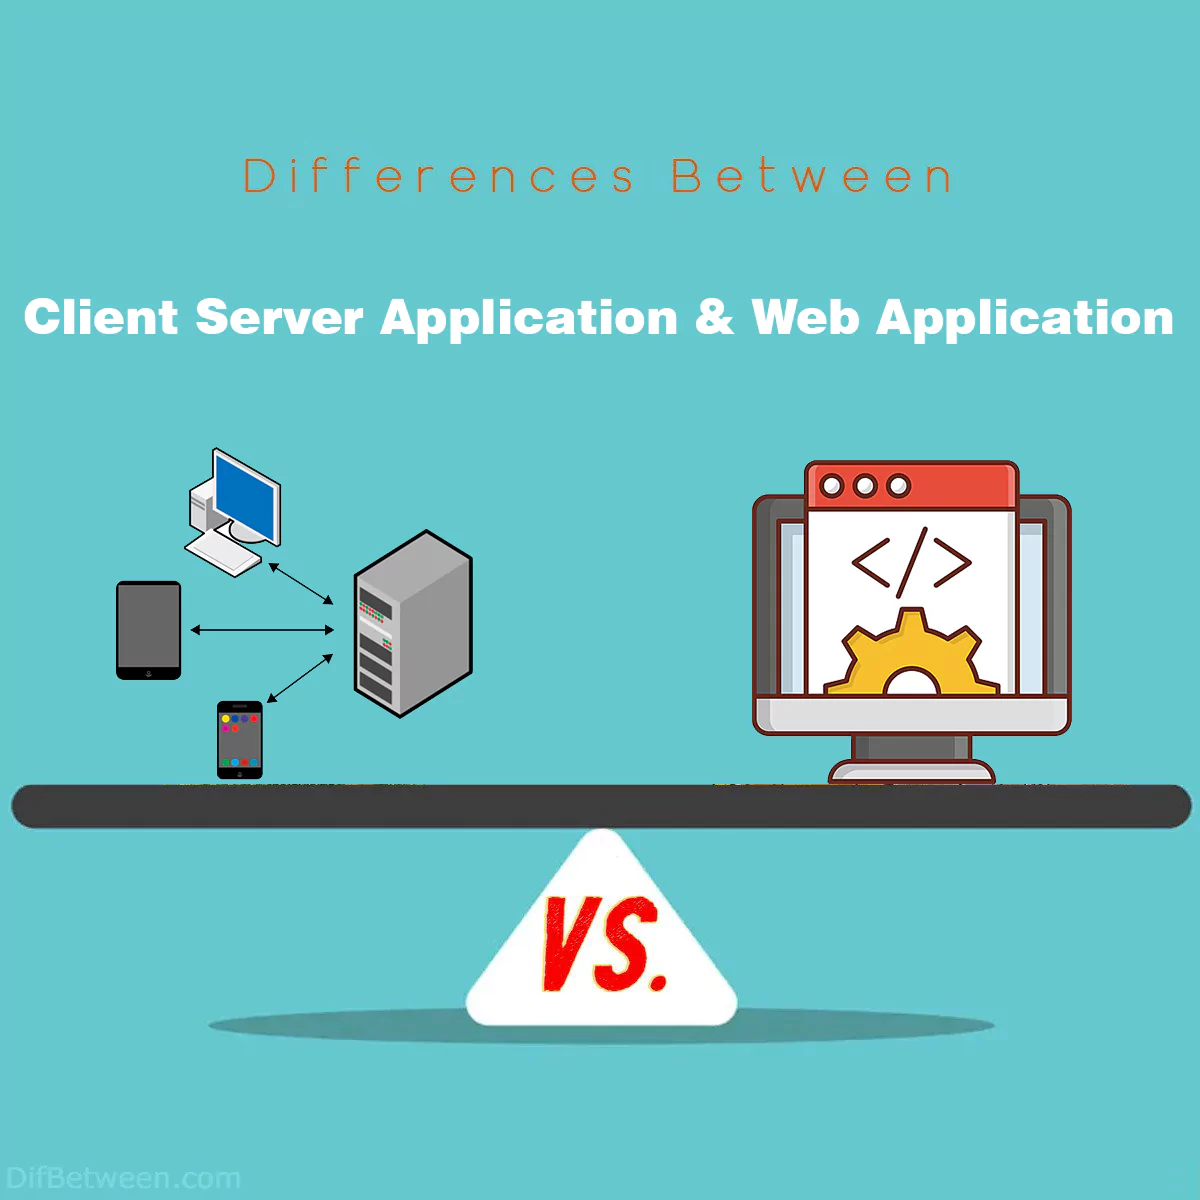 Differences Between Client Server Application and Web Application